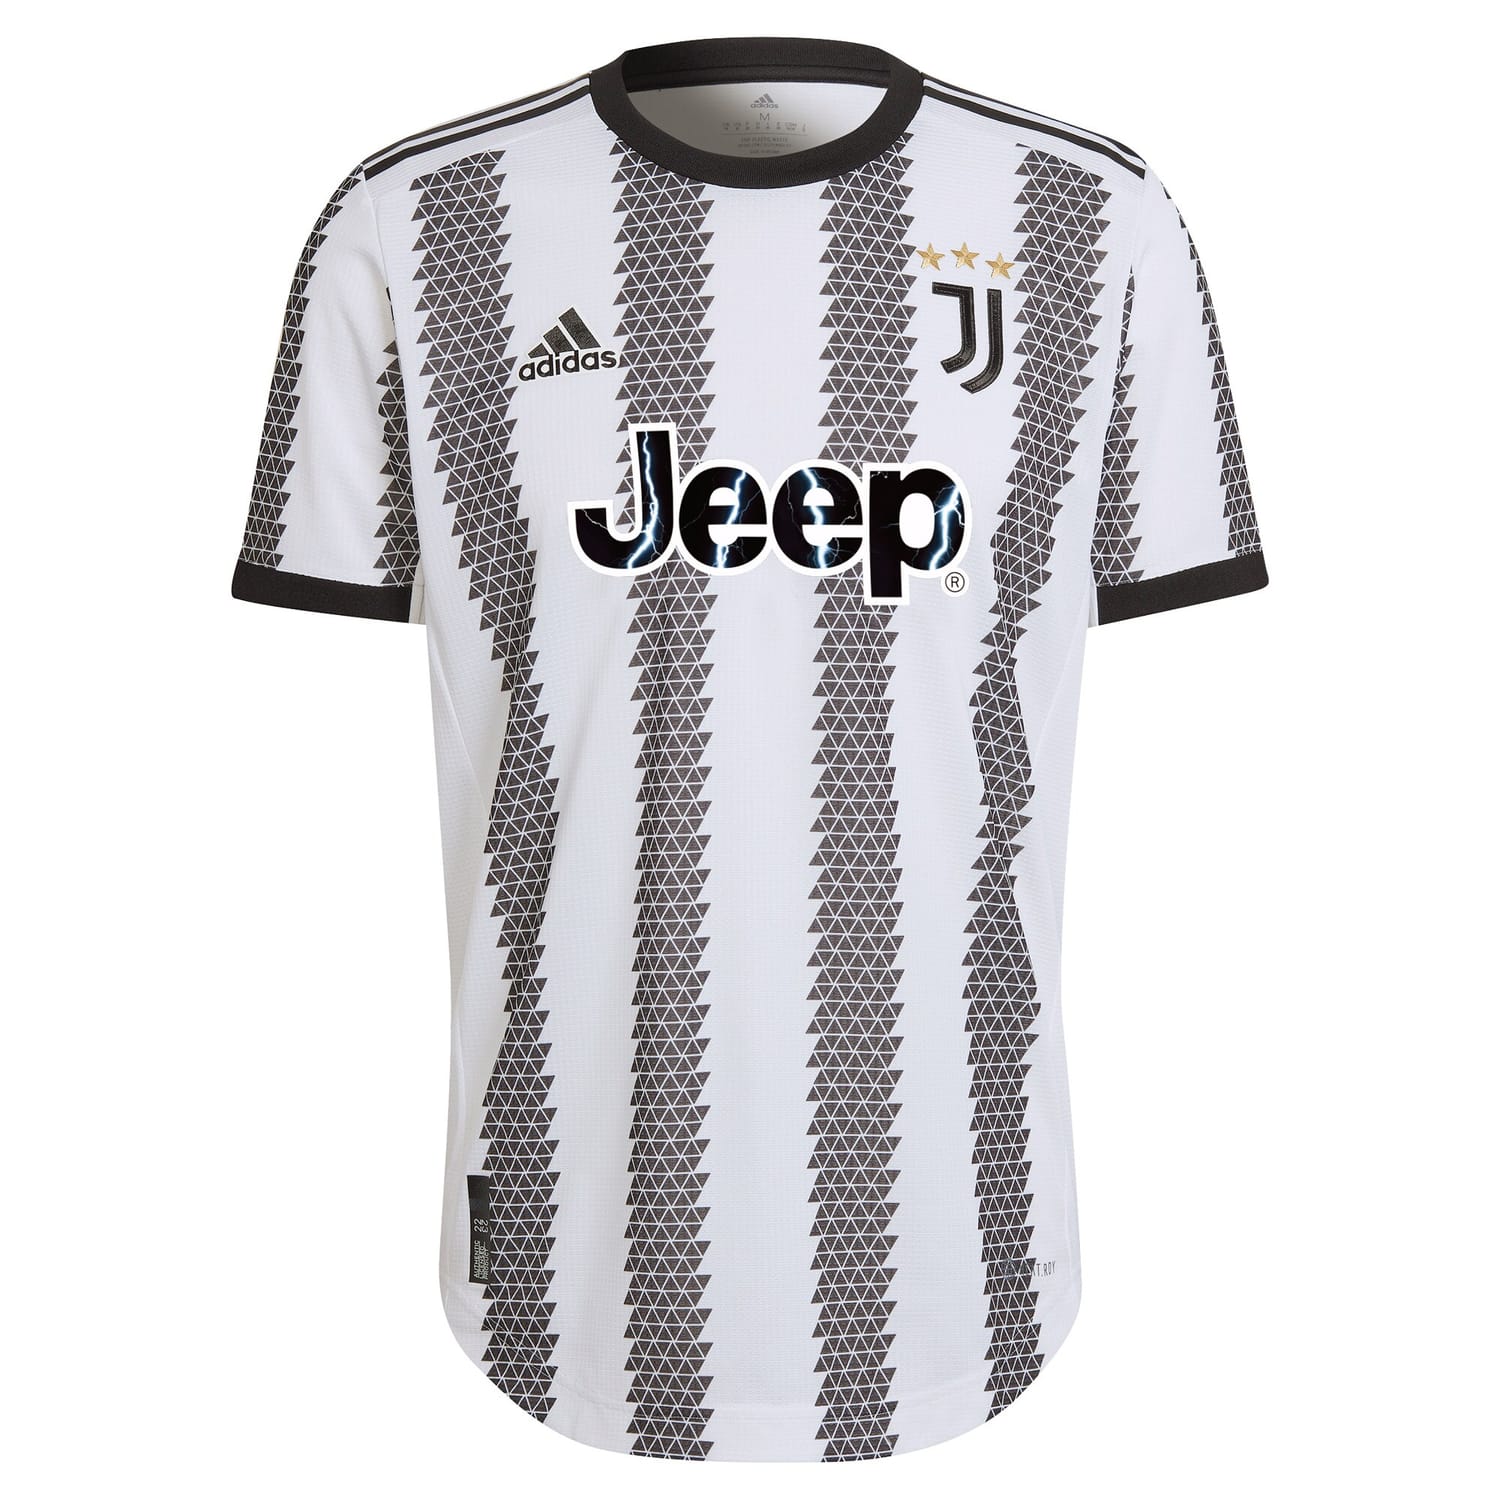 Serie A Juventus Home Authentic Jersey Shirt White 2022-23 player Weston McKennie printing for Men